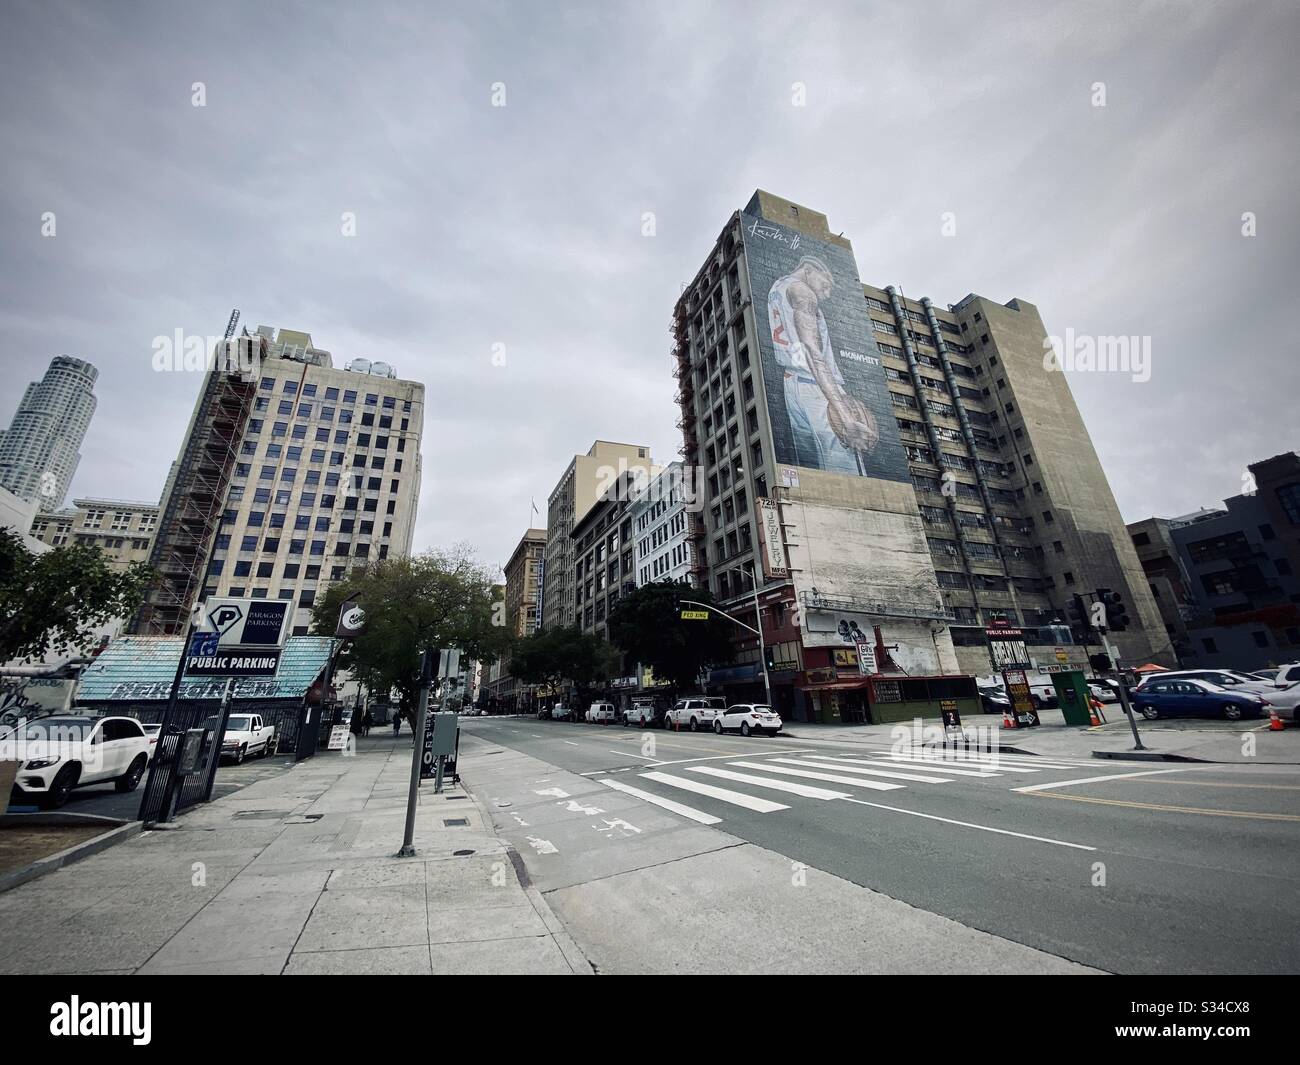 LOS ANGELES, CA, MAR 2020: parking lots, apartments and office buildings on Hill St in Downtown. Mural of Kobe Bryant on nearby building. US Bank Tower visible in background Stock Photo